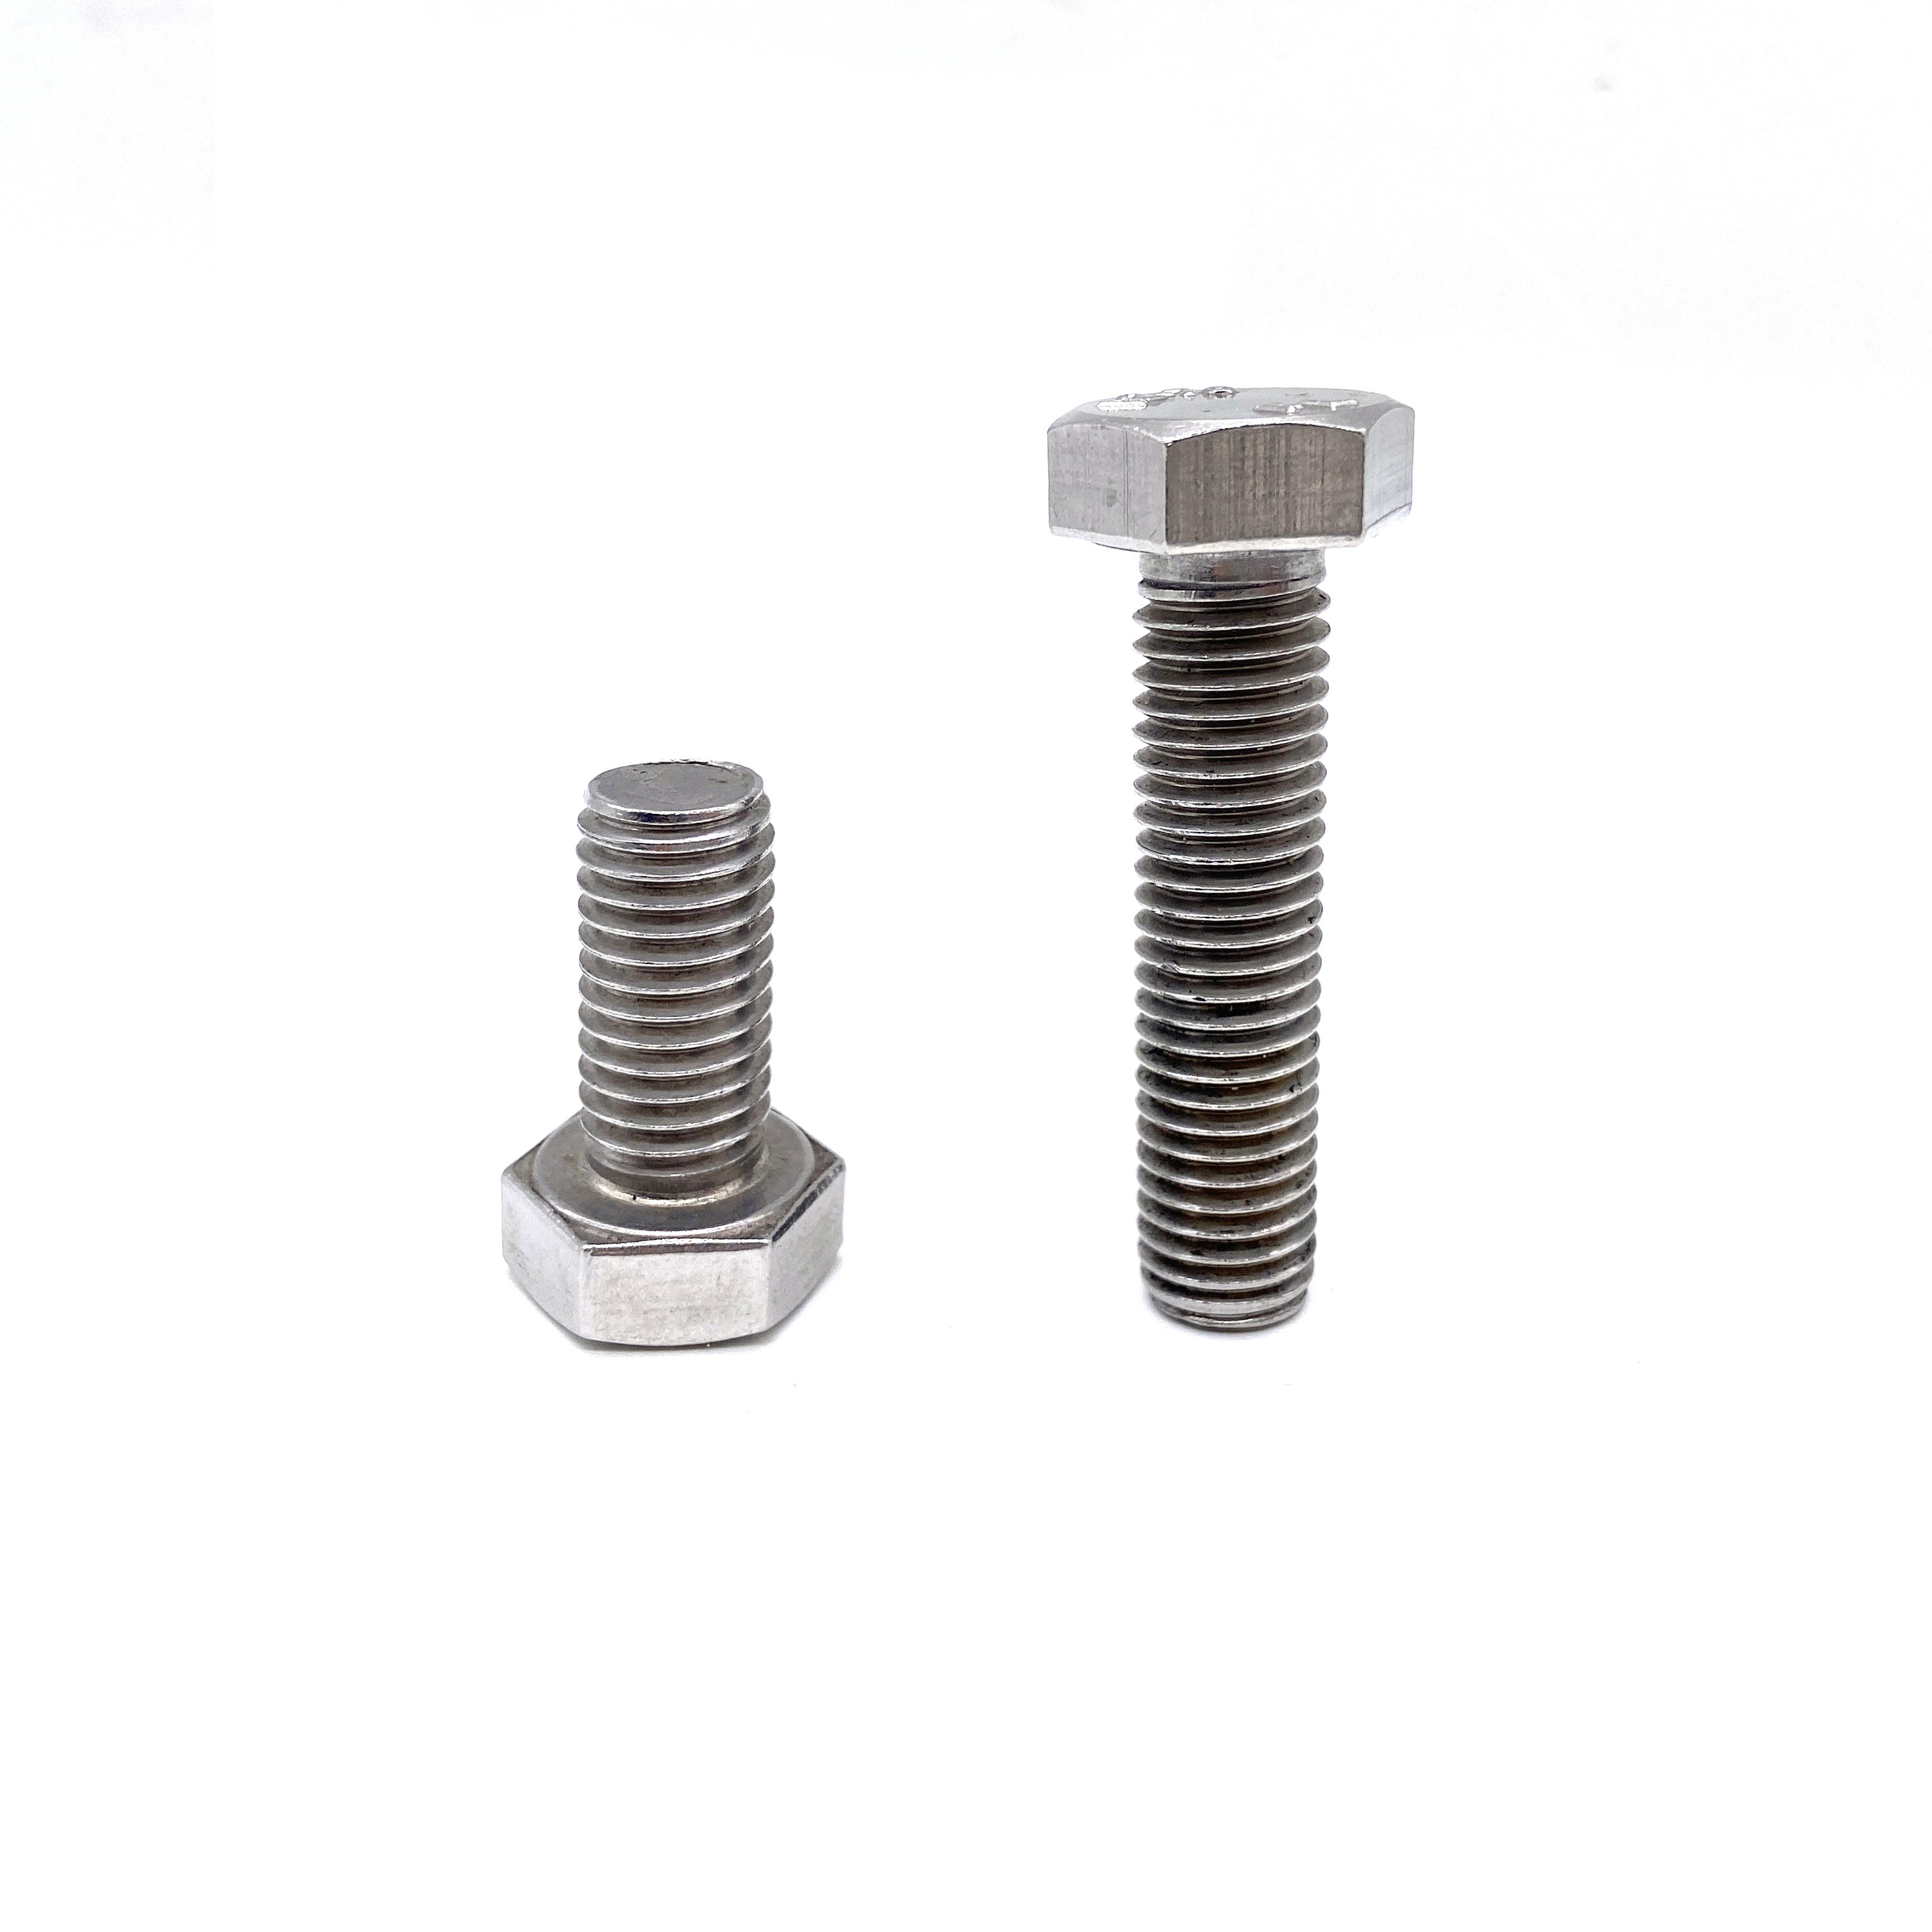 DIN933 M5 M10 M12 M8 A2-70 Stainless Steel Hex Bolts - Buy m10